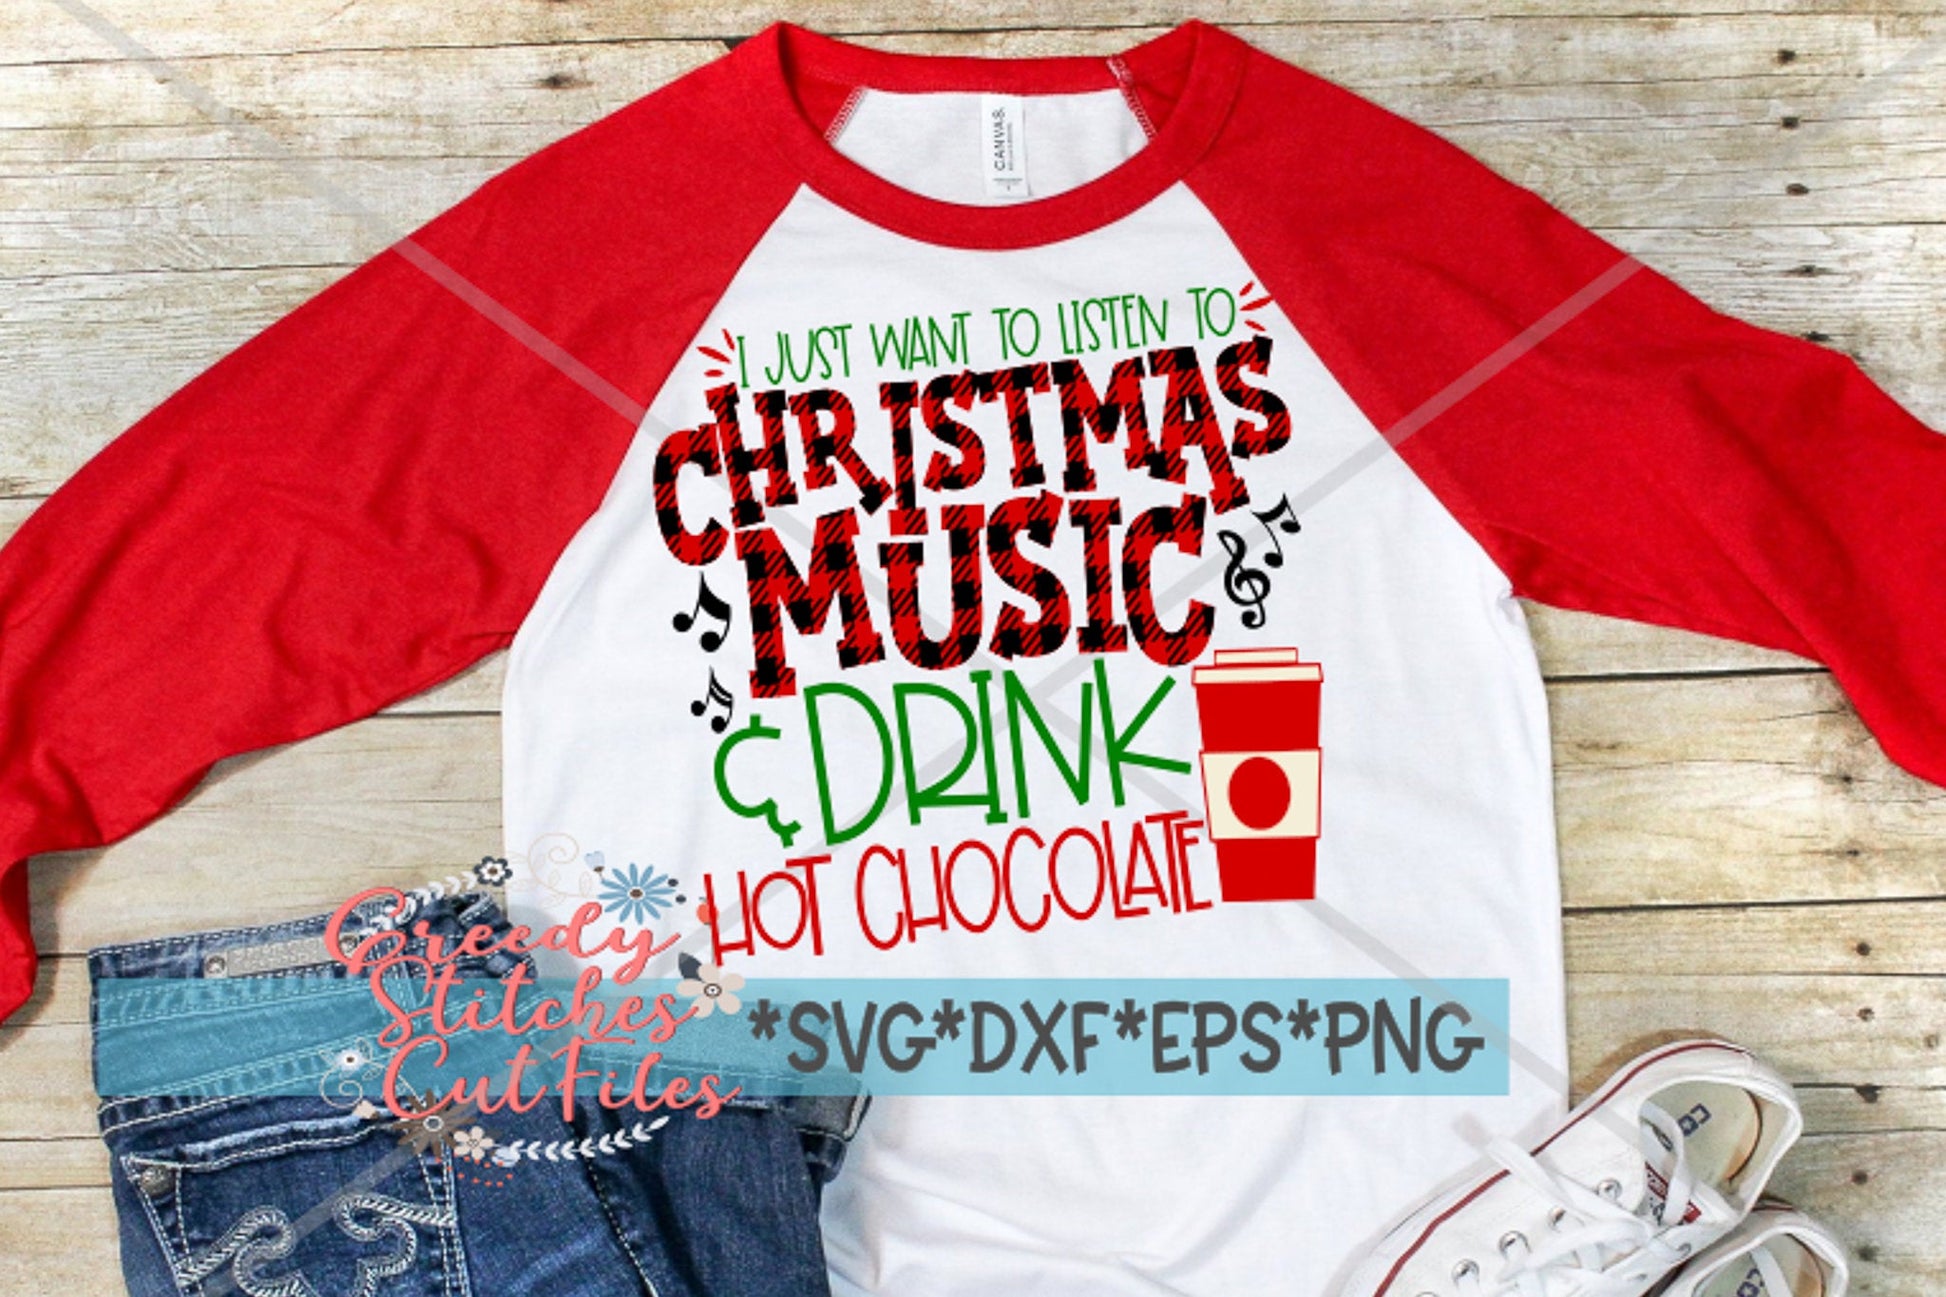 I Just Want To Listen To Christmas Music & Drink Hot Chocolate svg dxf eps png. Christmas SvG | Hot Chocolate SvG |Instant Download Cut File